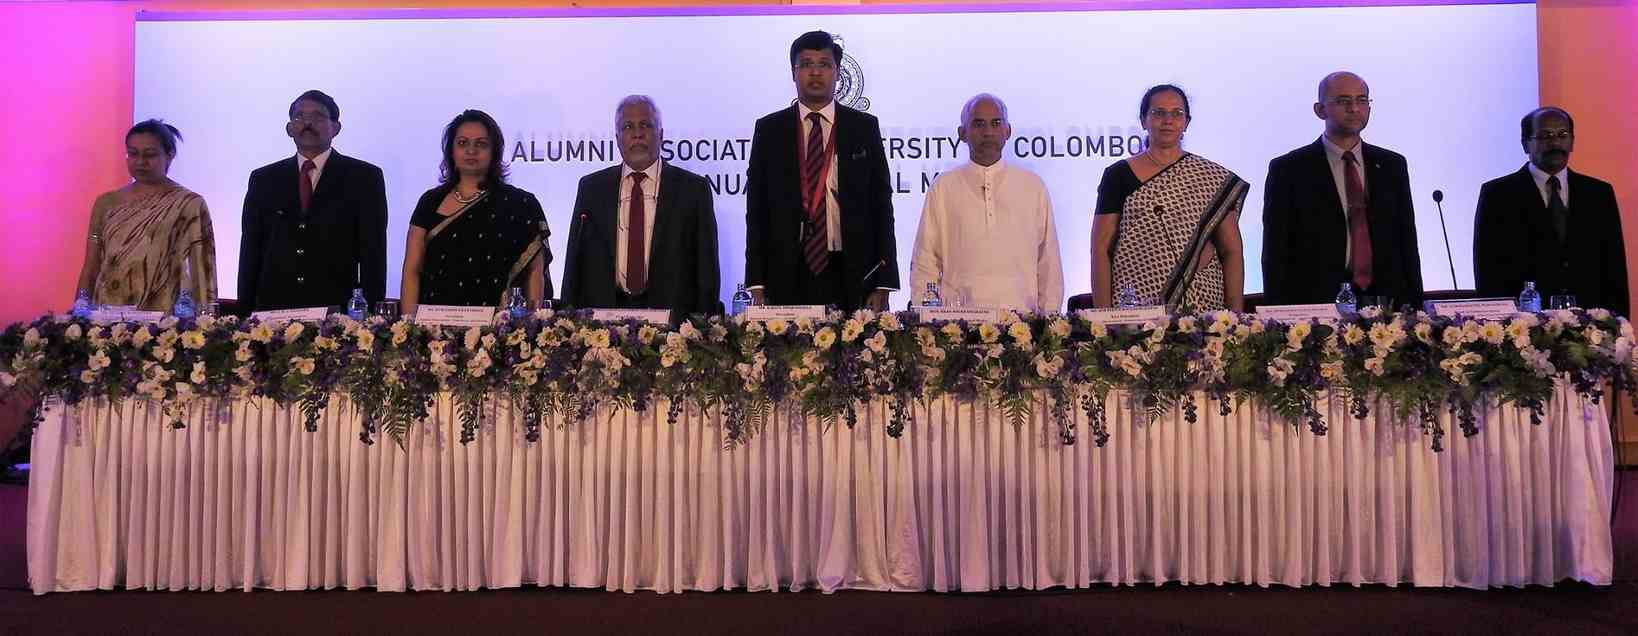 35th Agm of Alumni Association of the University of Colombo